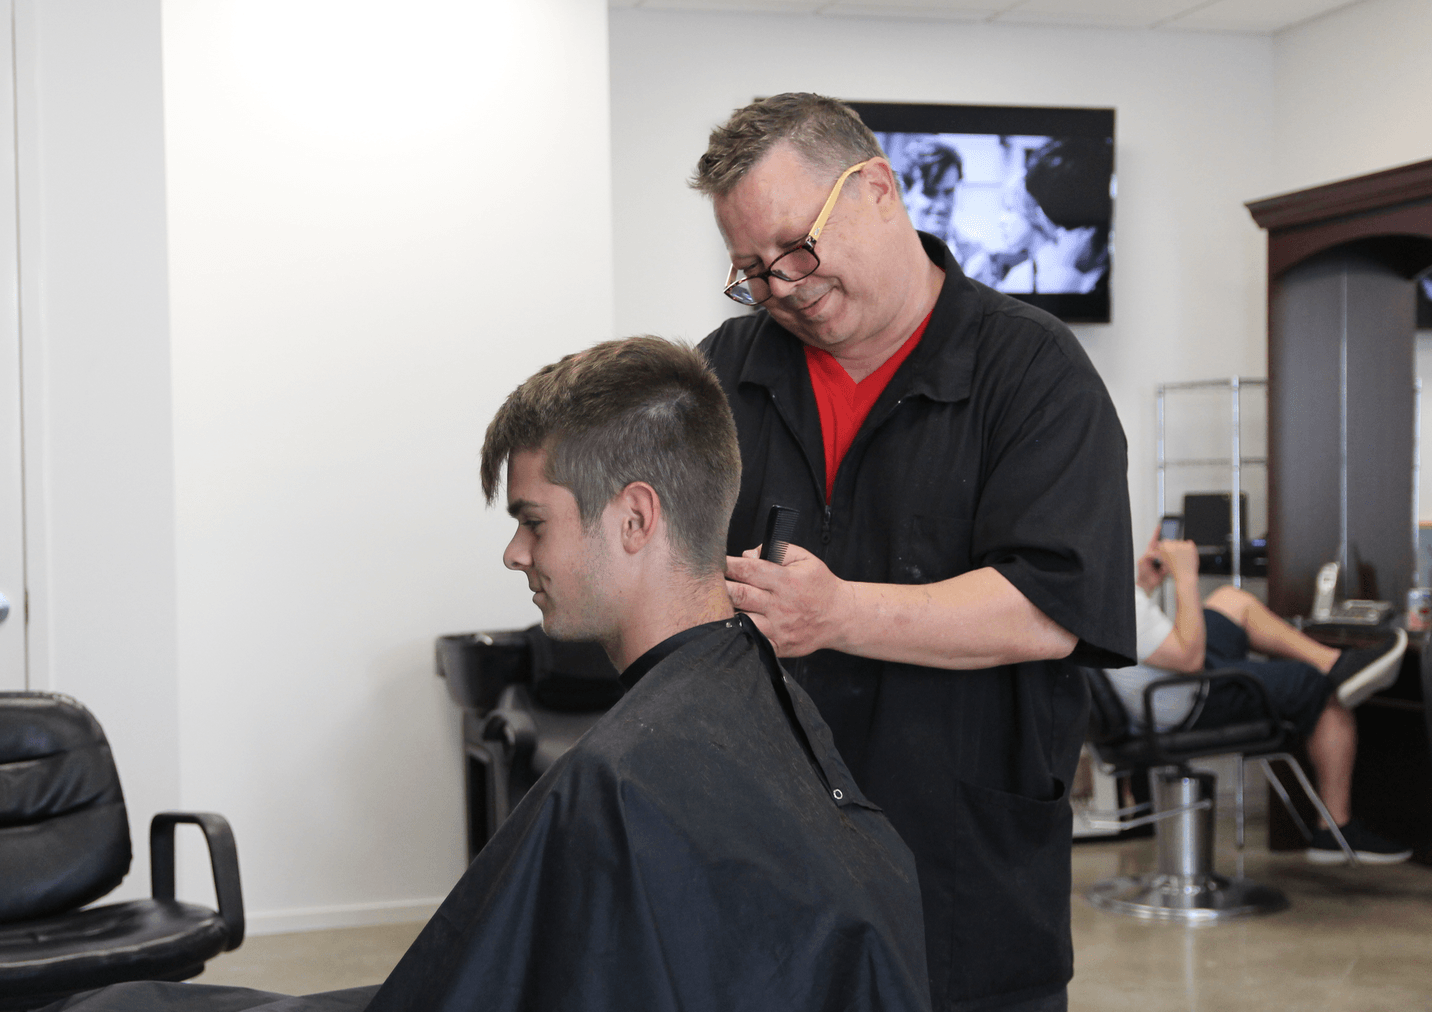 Taylor Ford, who had just come home from college, was having his hair cut by Glenn Podbielski at Avenue Barber. May 25, 2018 Photo: Leslie Yager